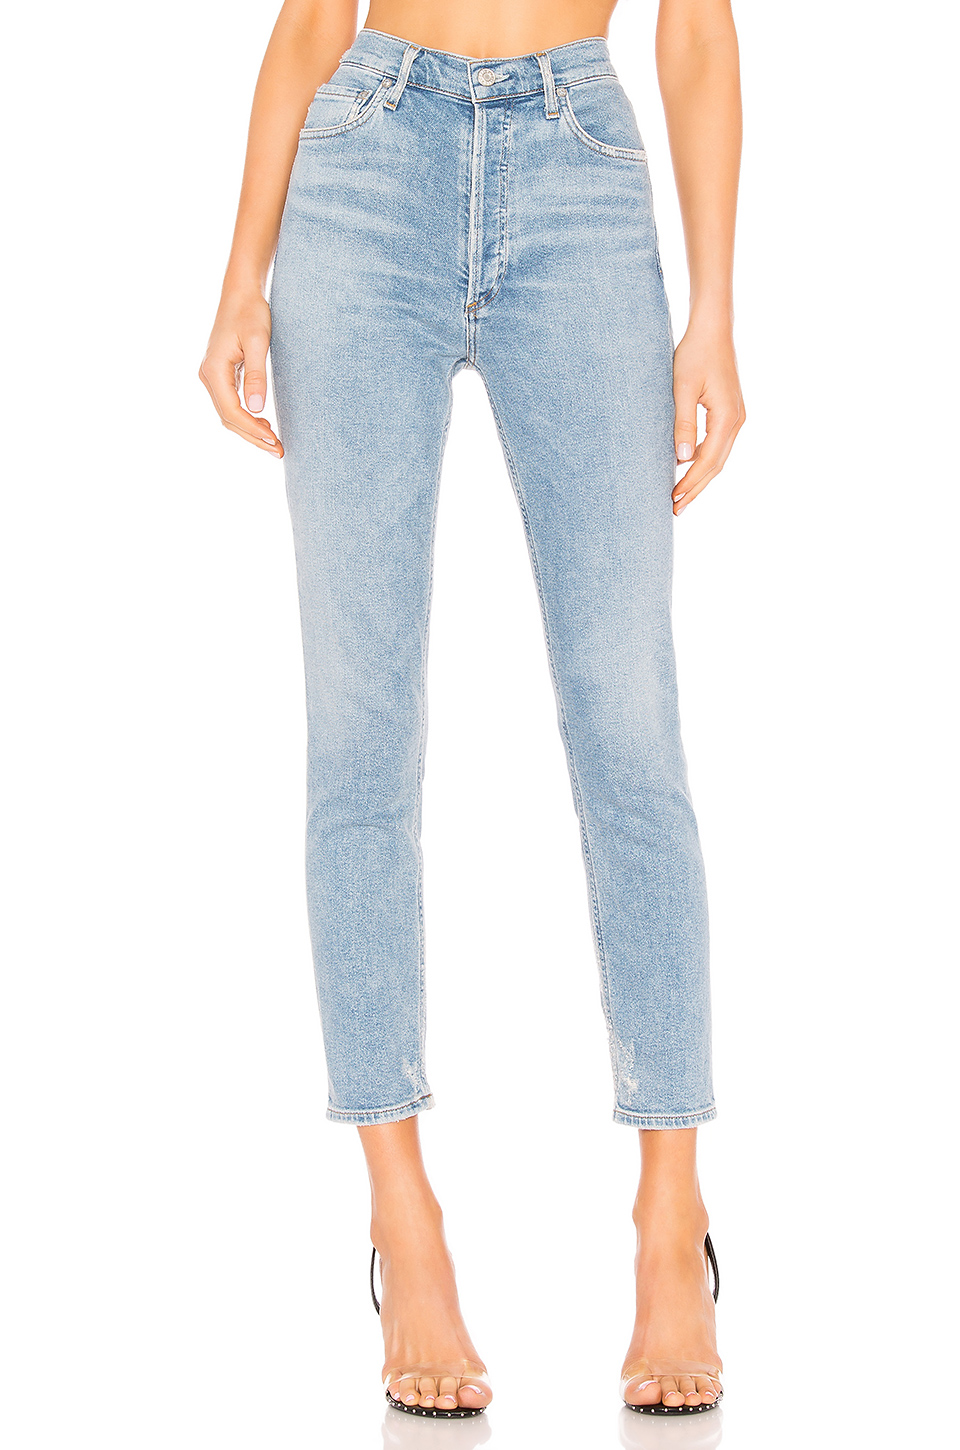 These 18 High-Waisted Skinny Jeans Have the Best Reviews | Who What Wear